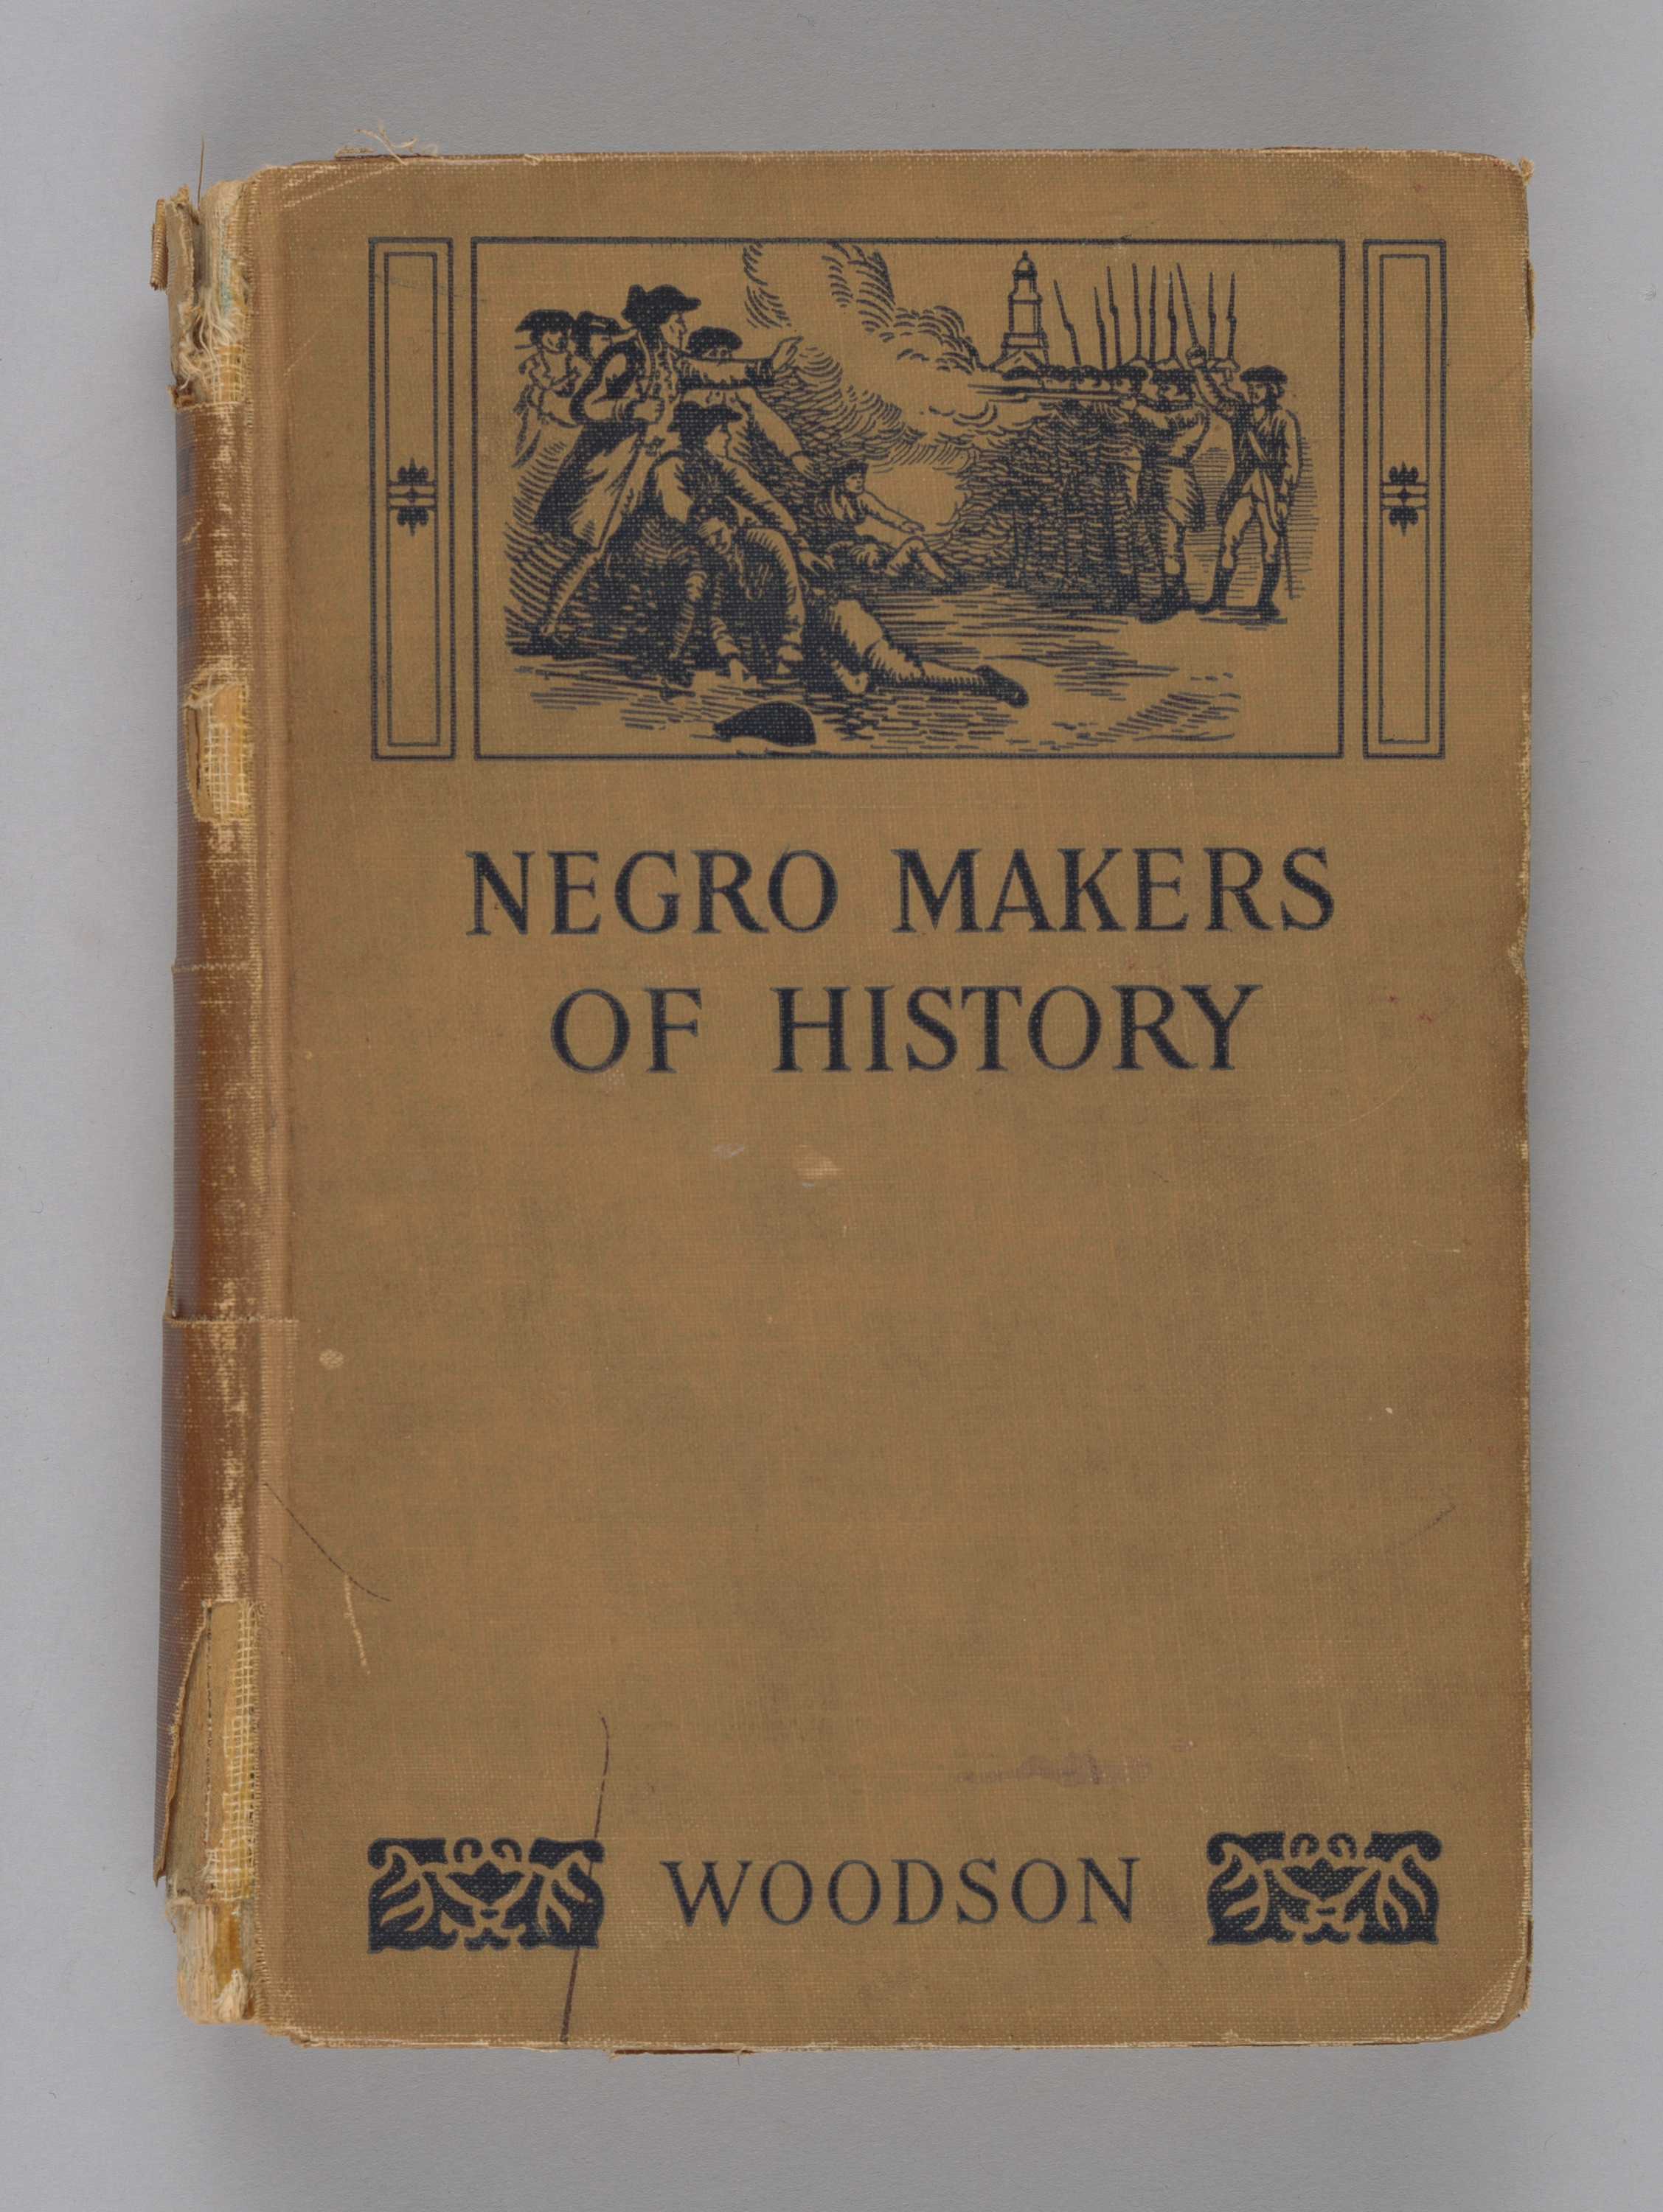 This hardback history book by Carter G. Woodson, totals 362 pages and contains the following inscription on the interior: [To Samuel C. Jackson with the best wishes of C.G. Woodson, Dec. 25, 1928].